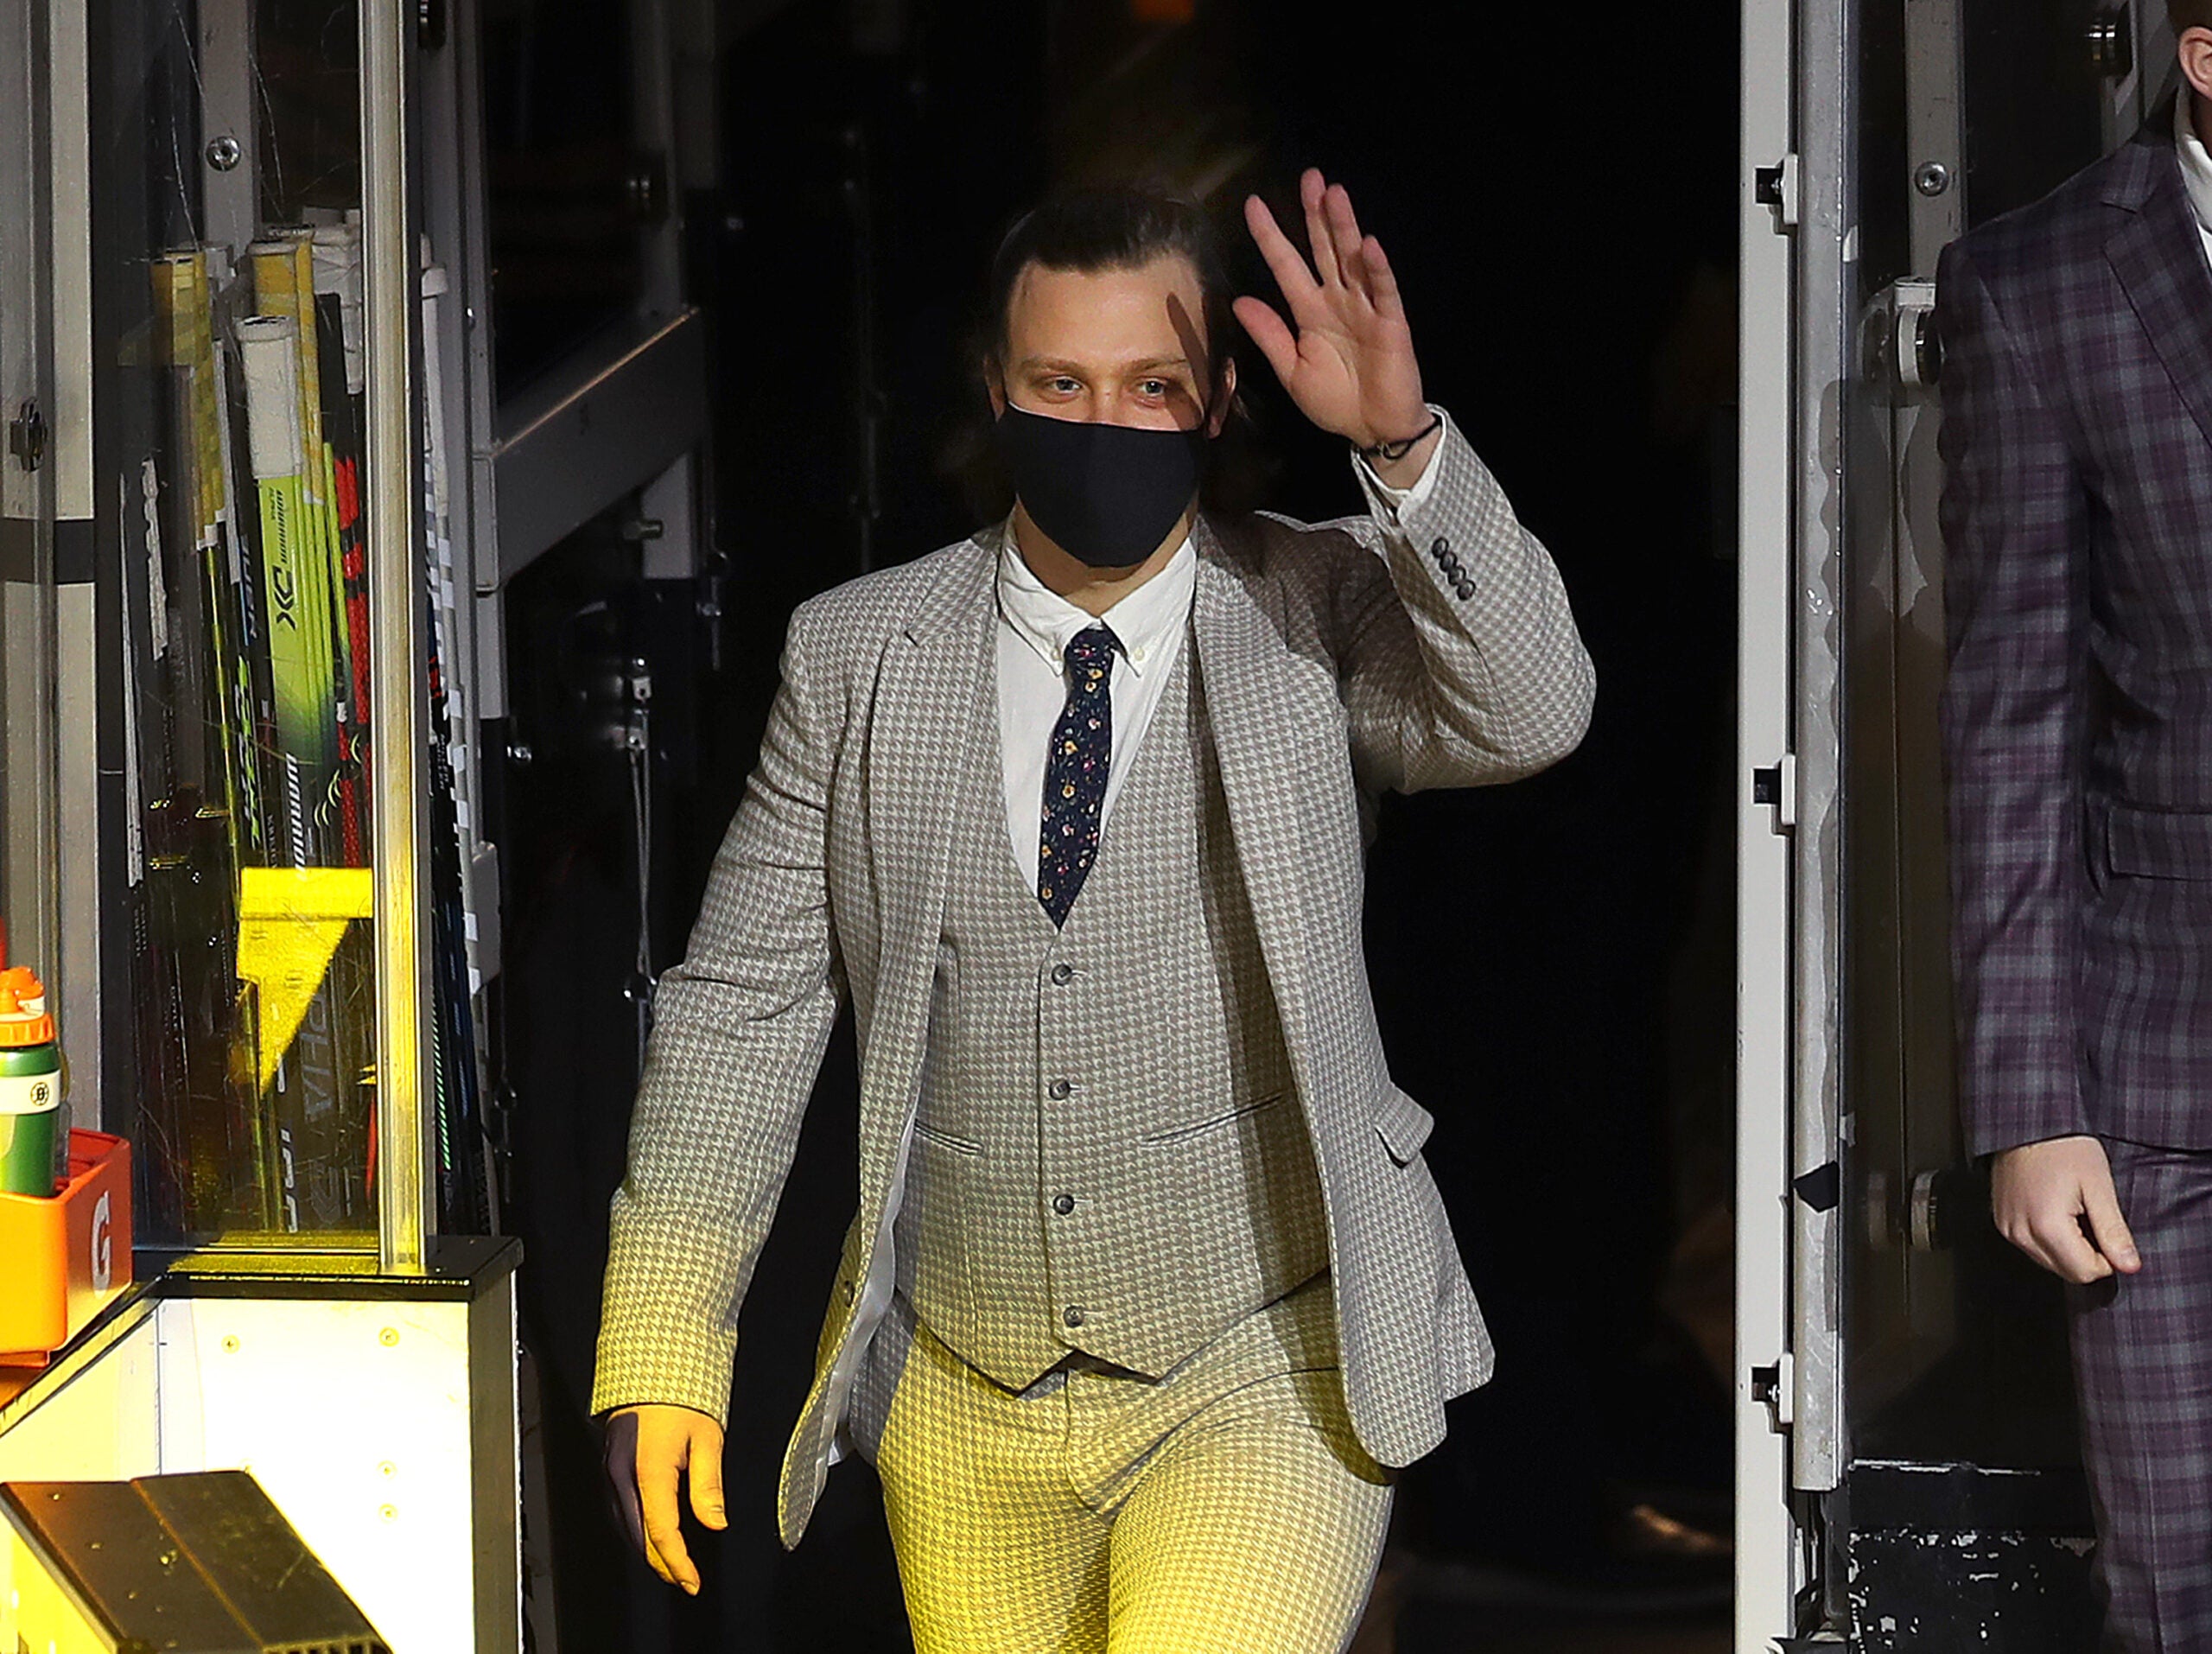 David Pastrnak of the Boston Bruins wears a holiday suit before